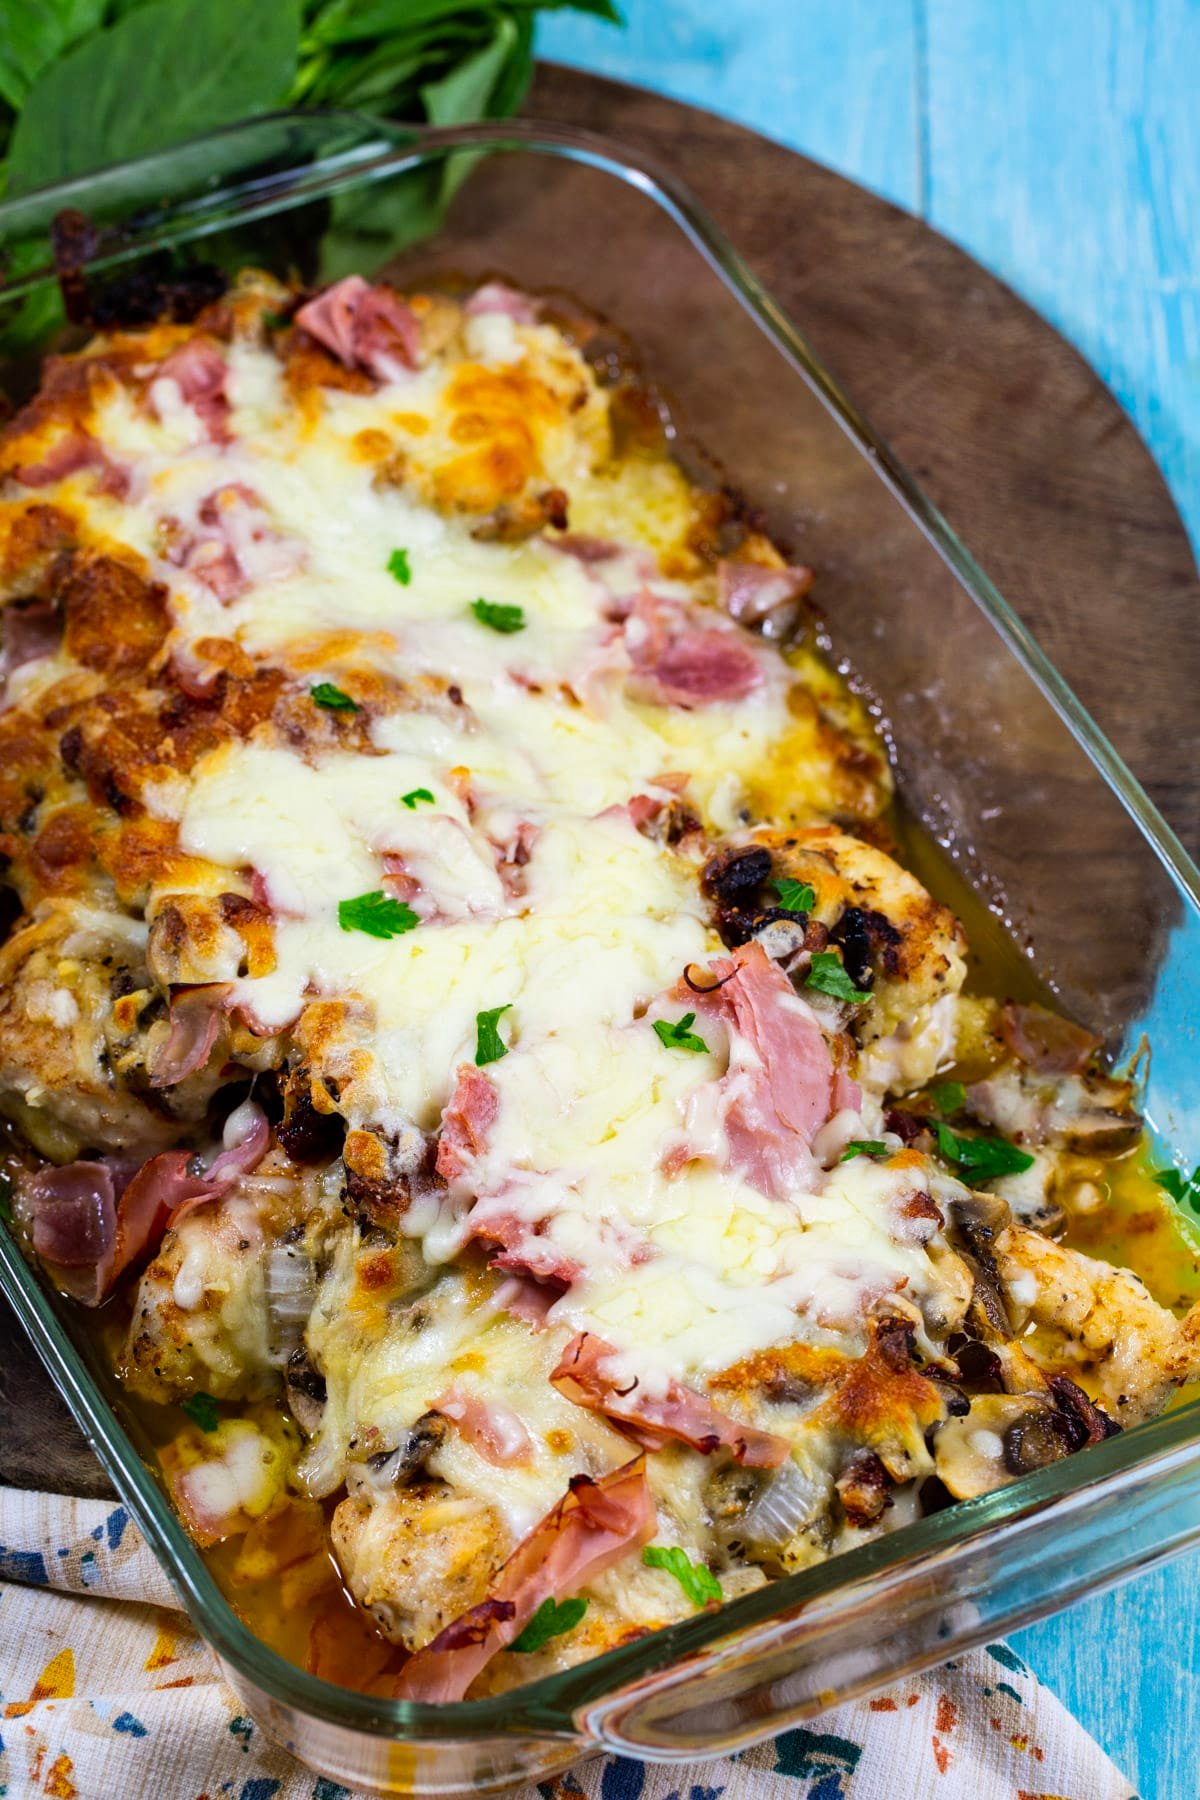 Company Chicken topped with ham, mushrooms and cheese.